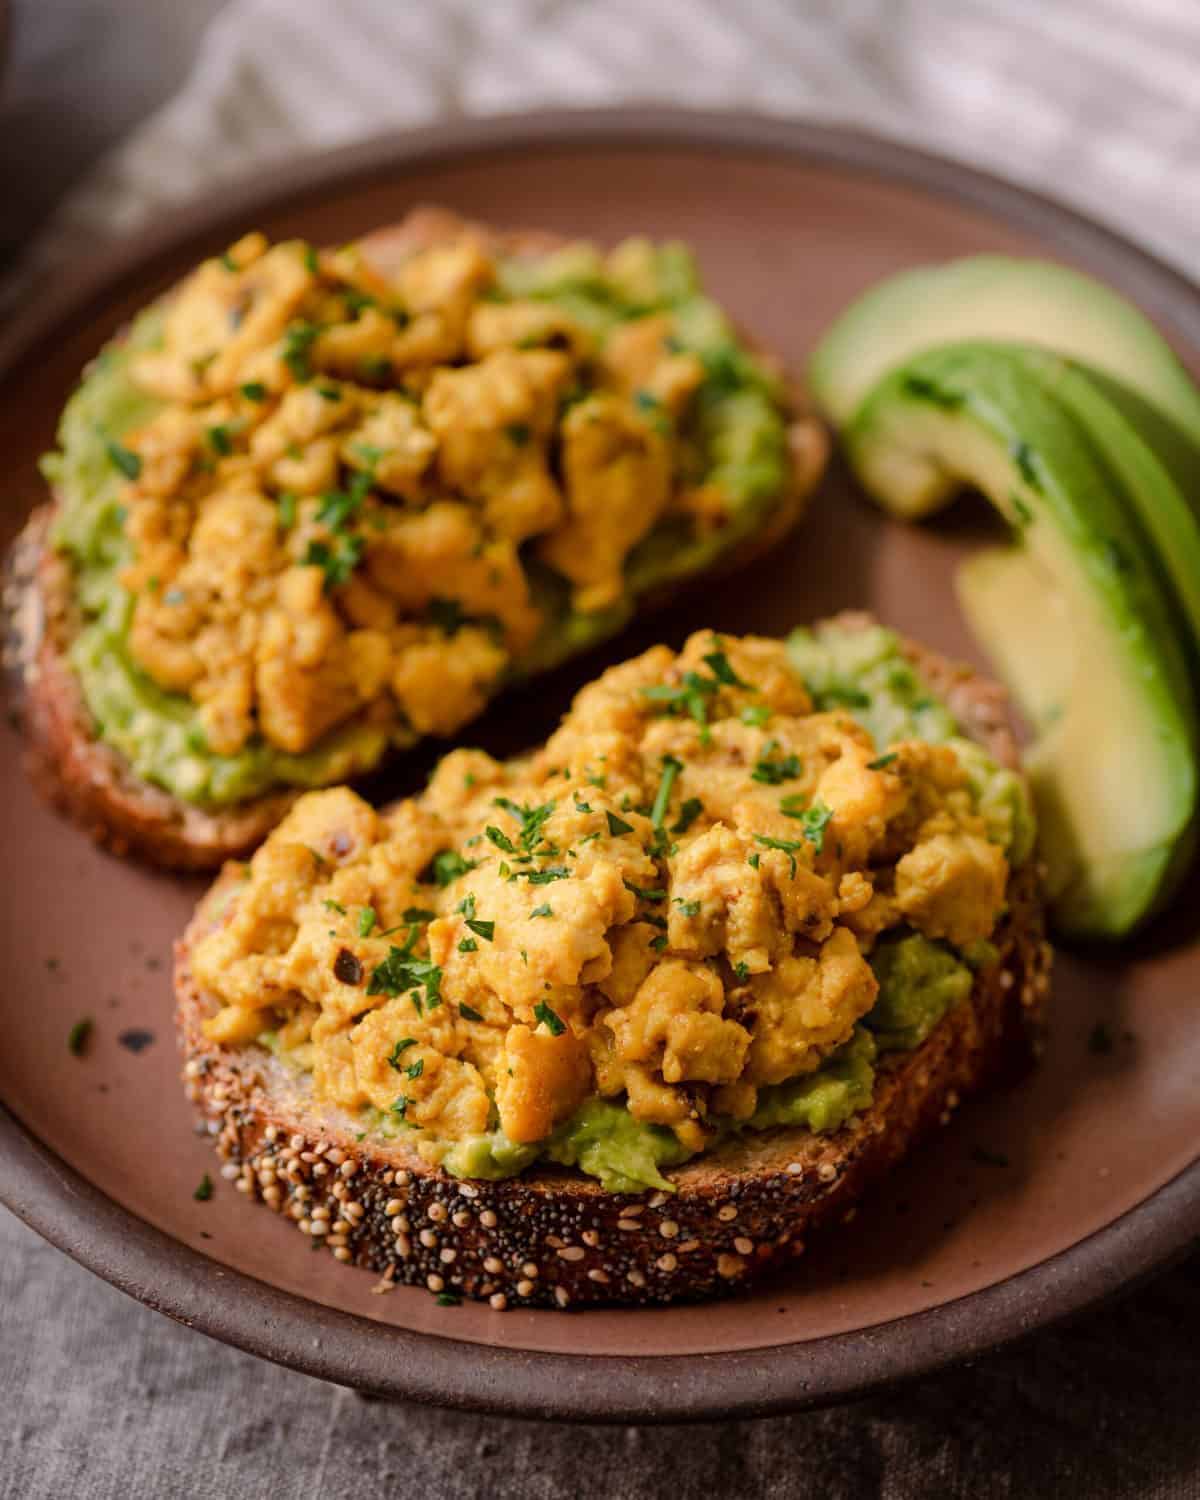 Tofu Scramble on slices of bread on a brown plate.